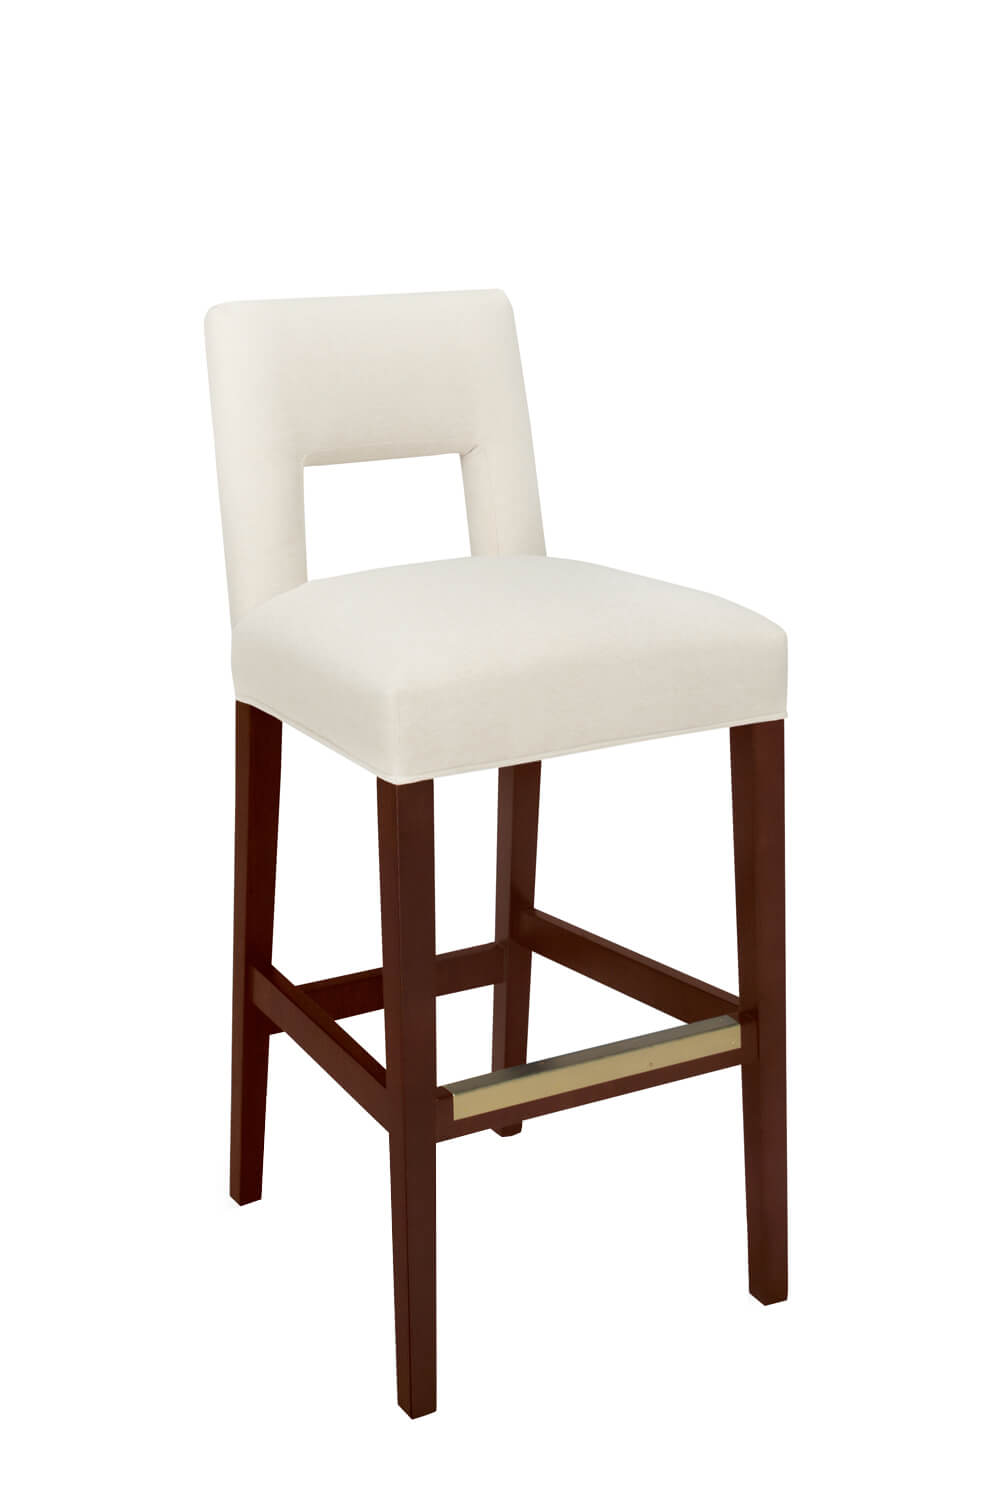 Style Upholstering's #6655-BS Cherry Wood Bar Stool with Light Seat and Back Cushion